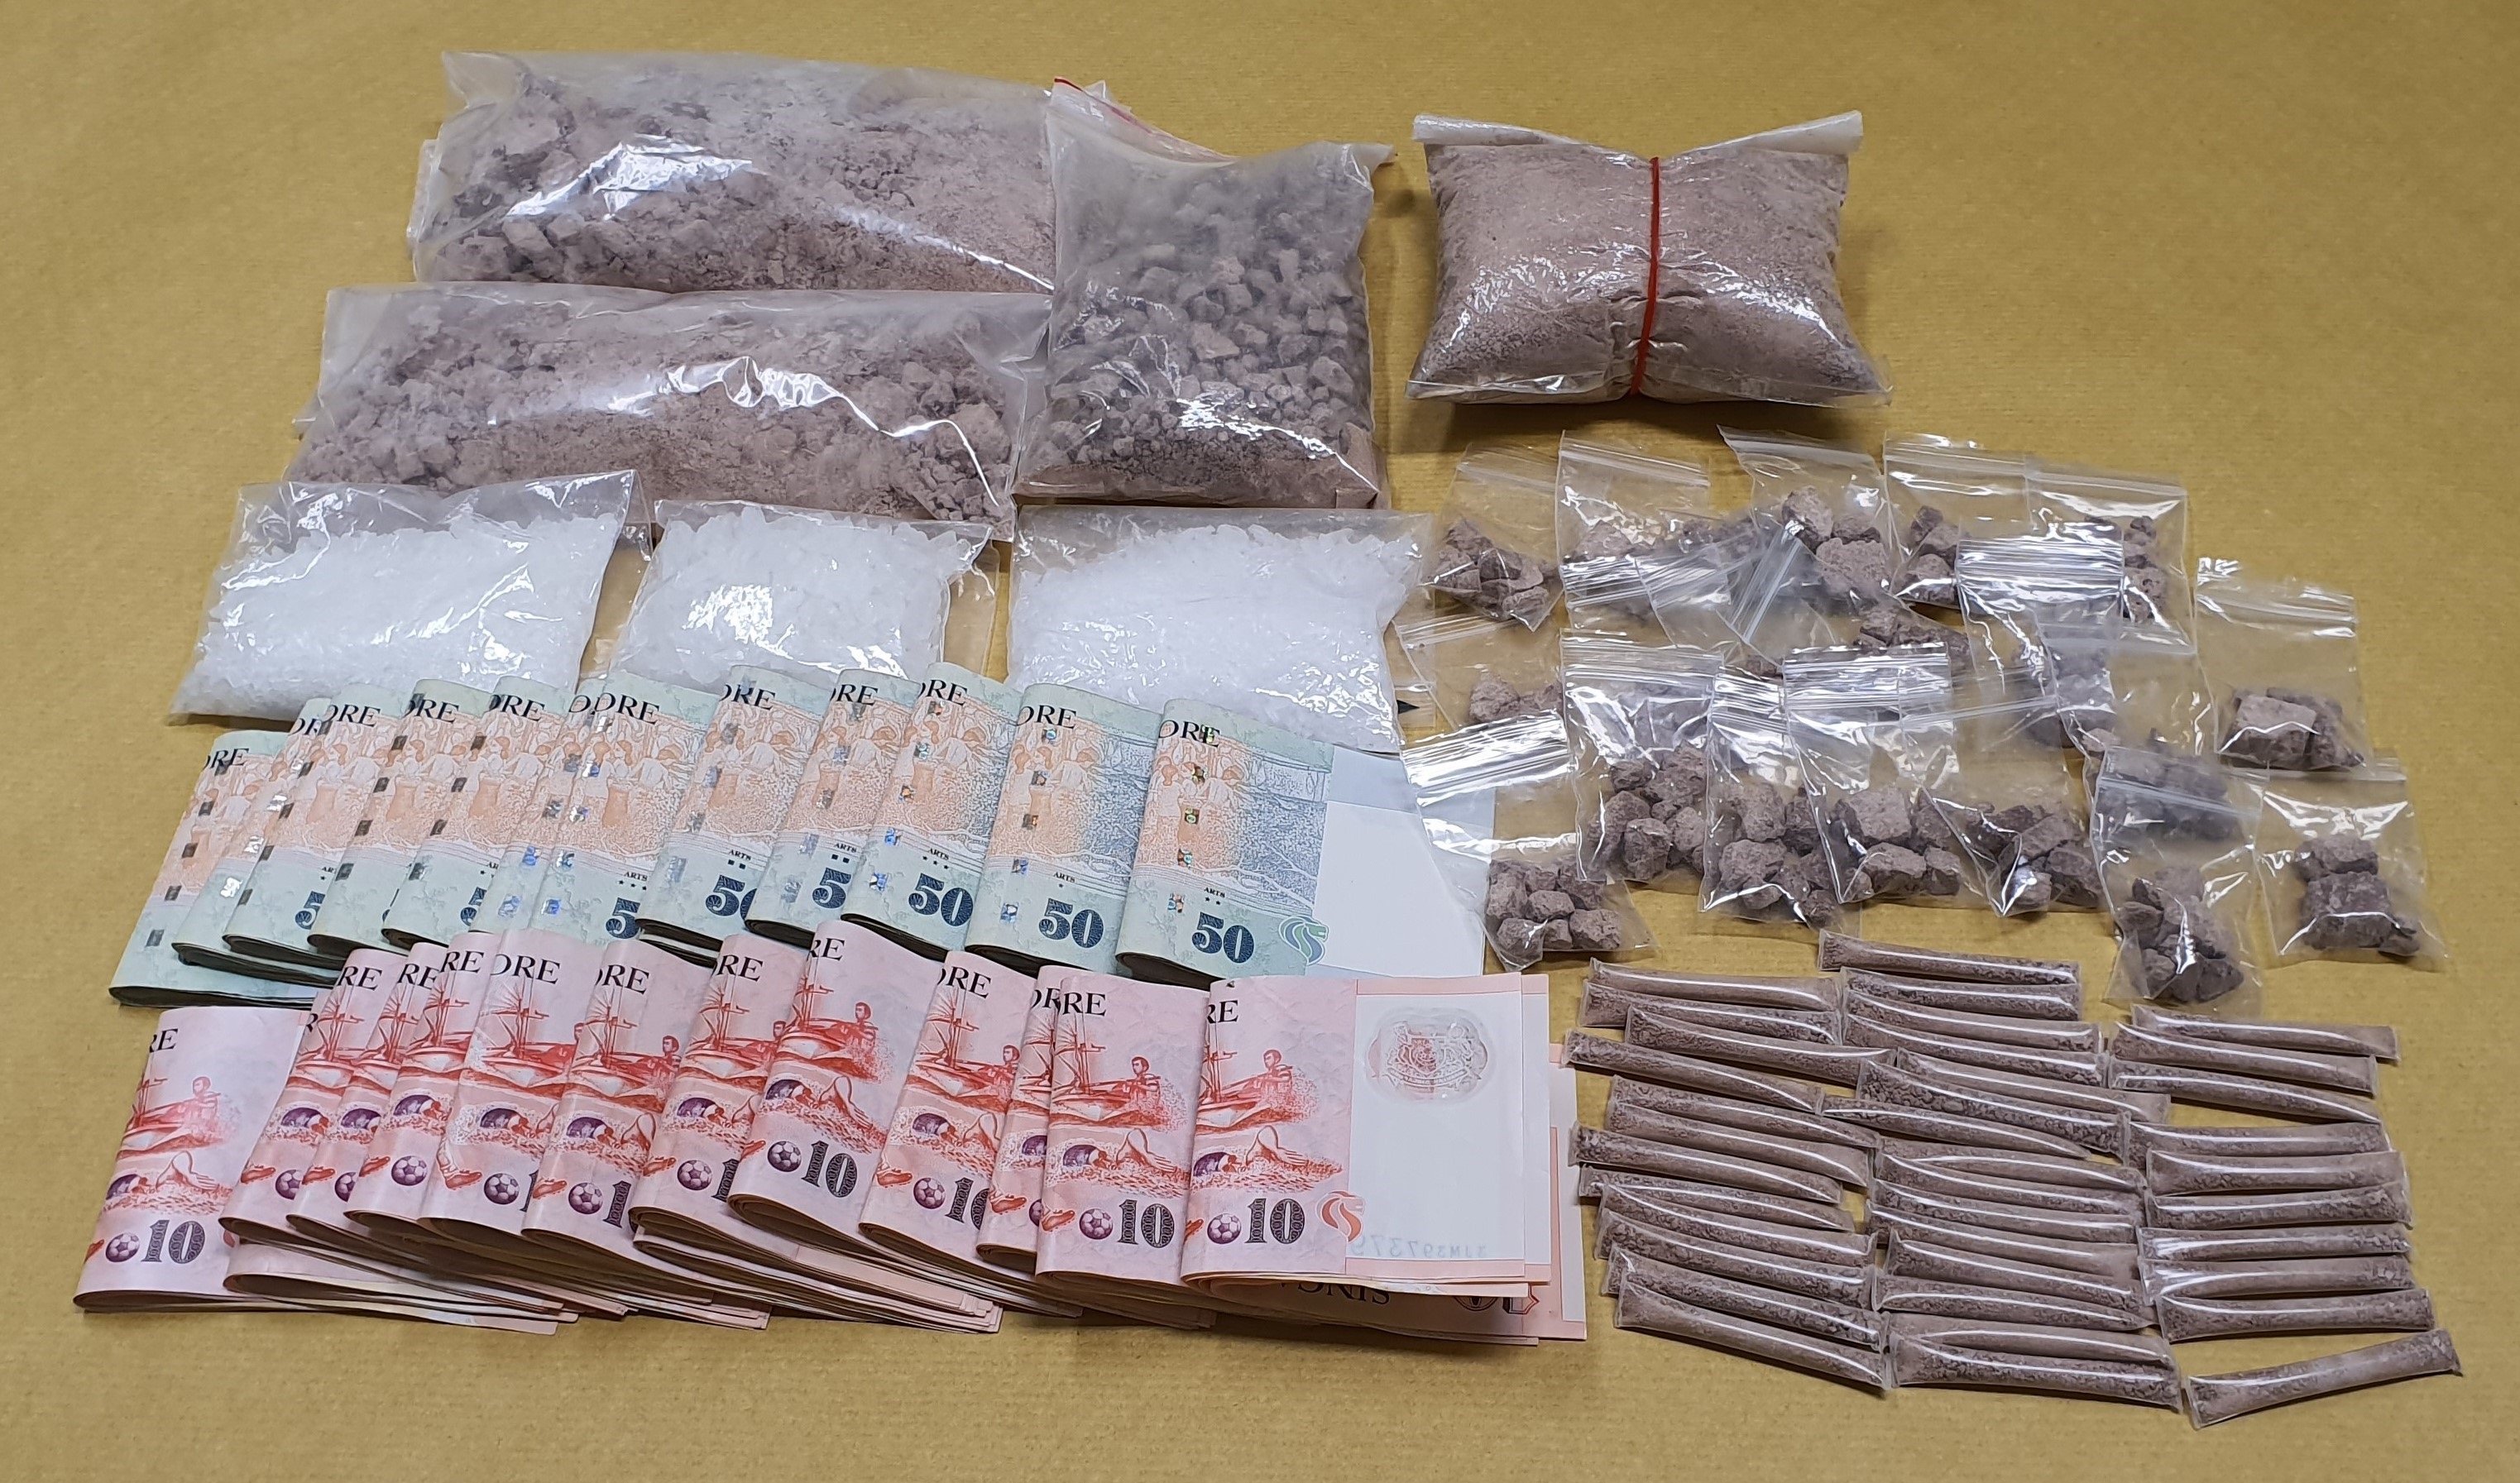 Photo-1 (CNB):  Drugs and cash seized from 54-year-old suspected drug trafficker and from within his residential unit, during CNB island-wide operation from 23 to morning of 27 September 2019.